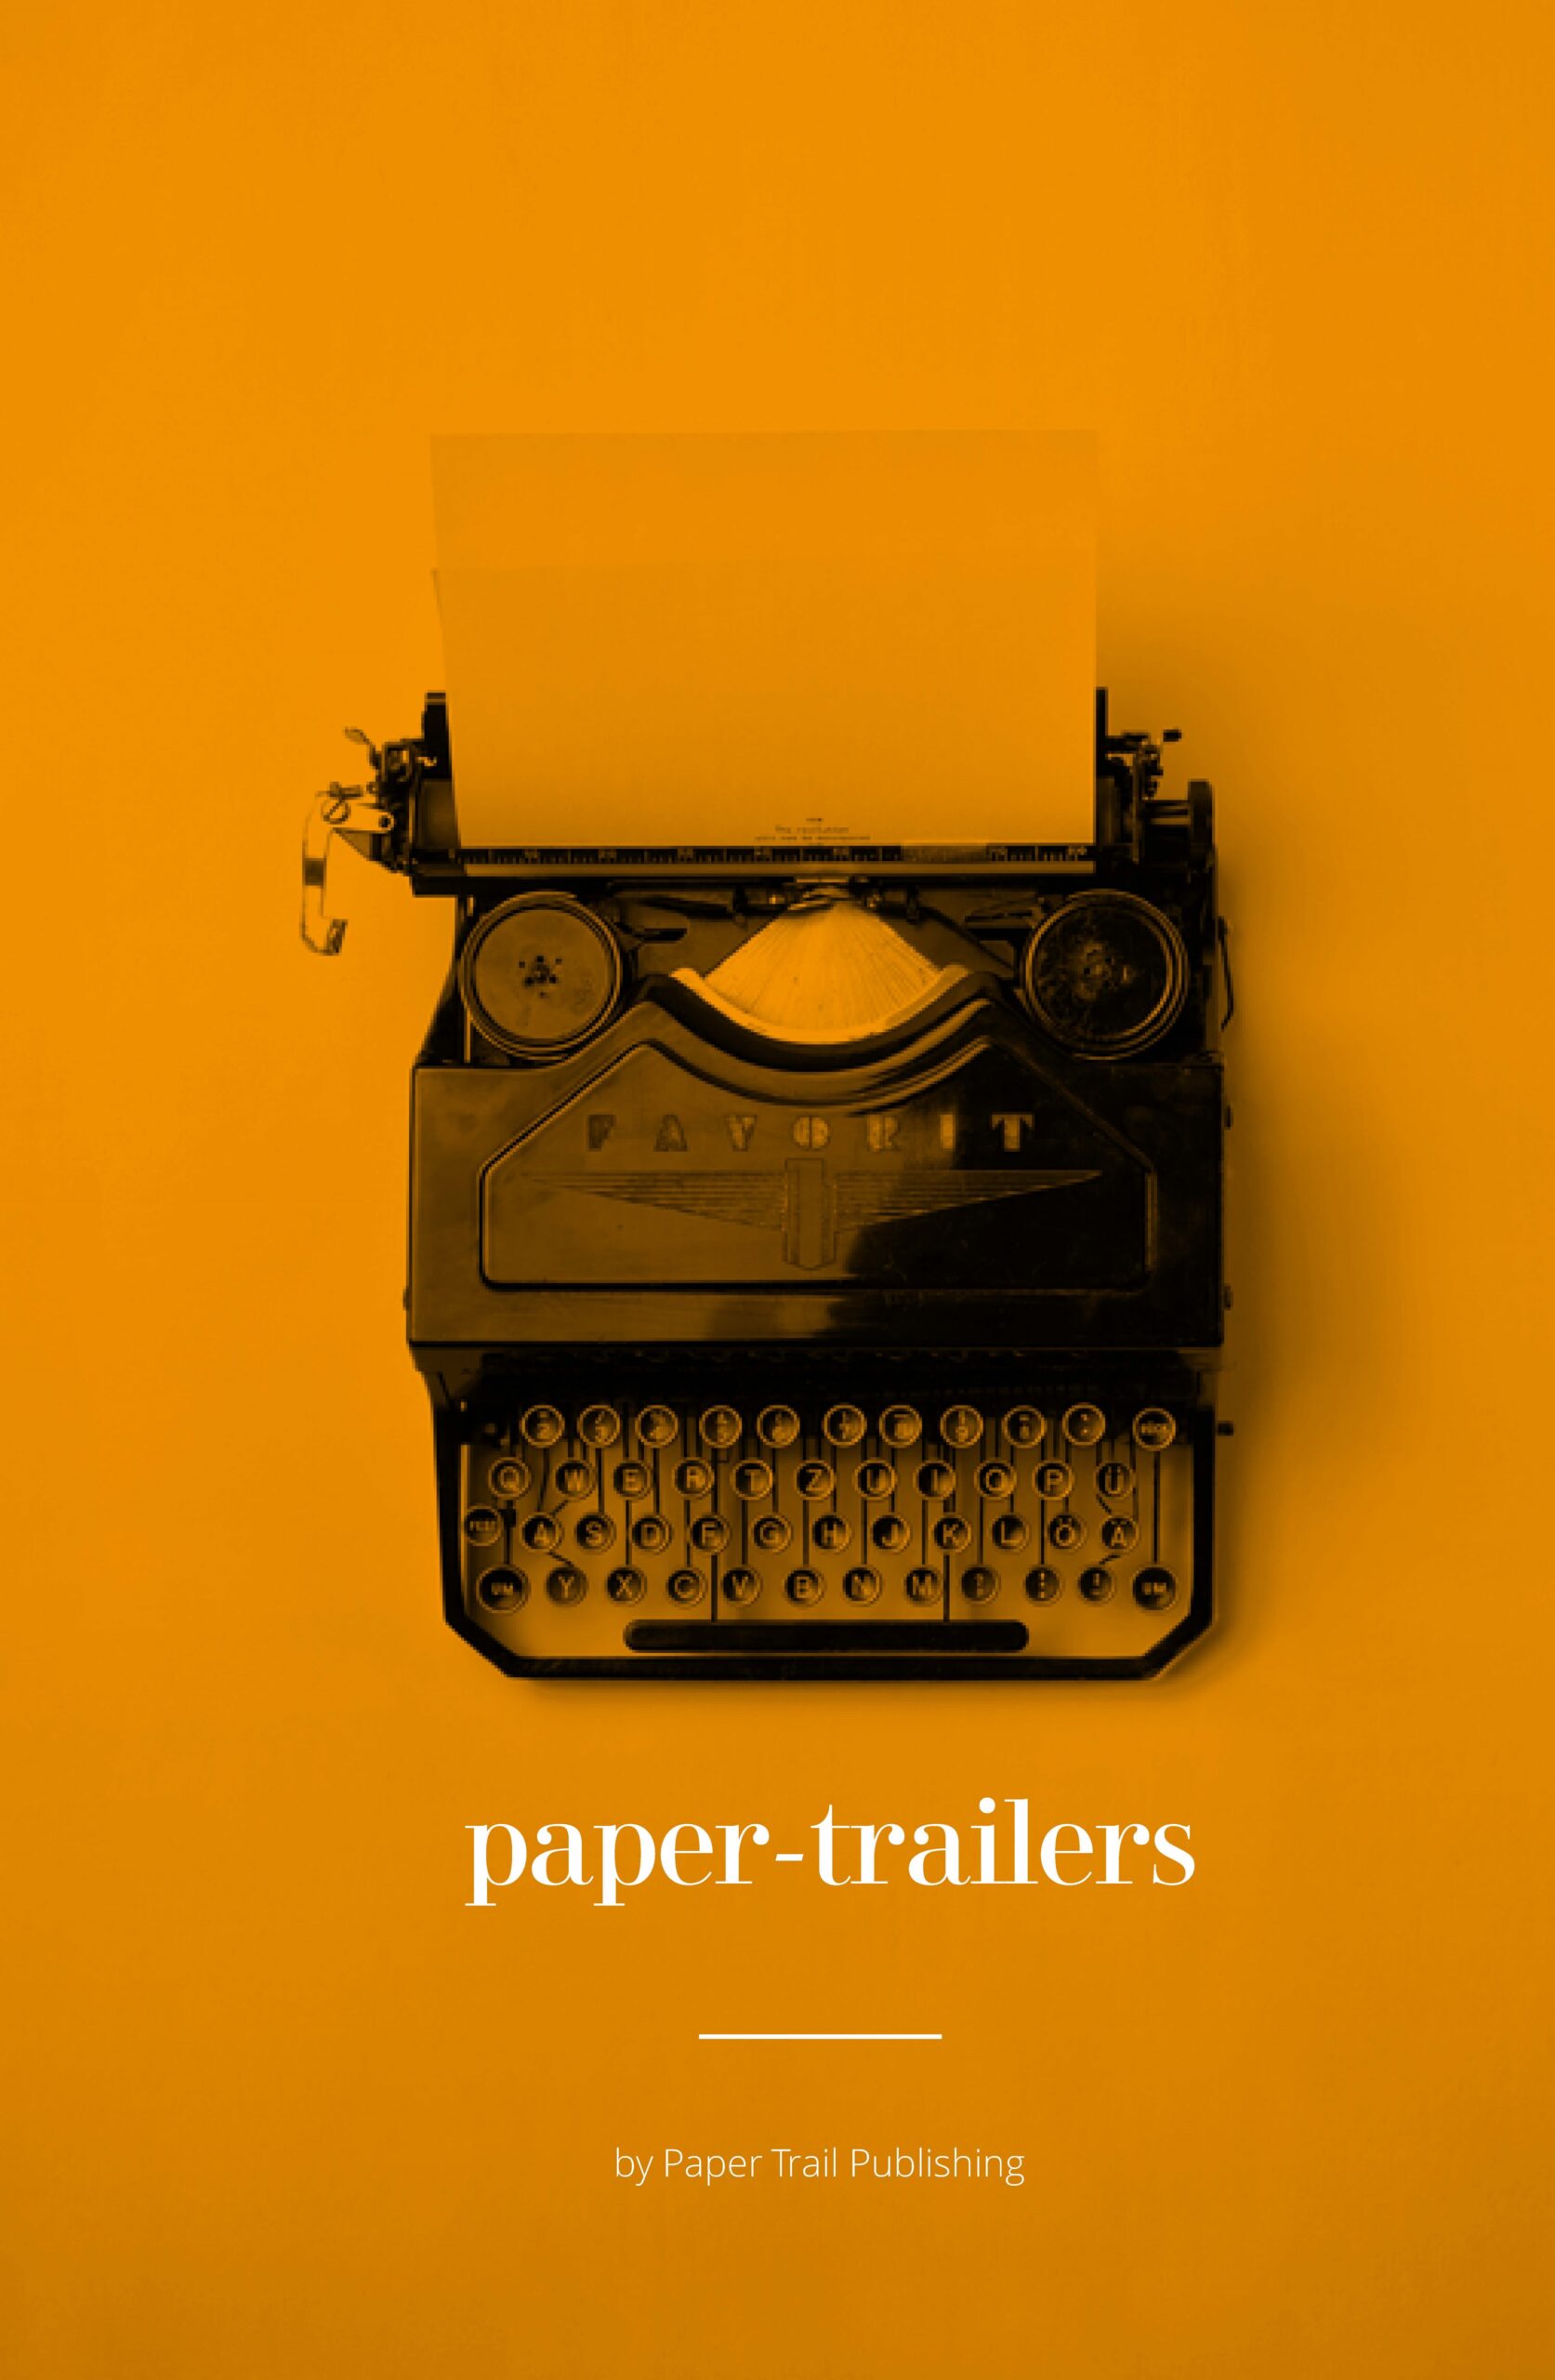 Paper-Trailers book cover